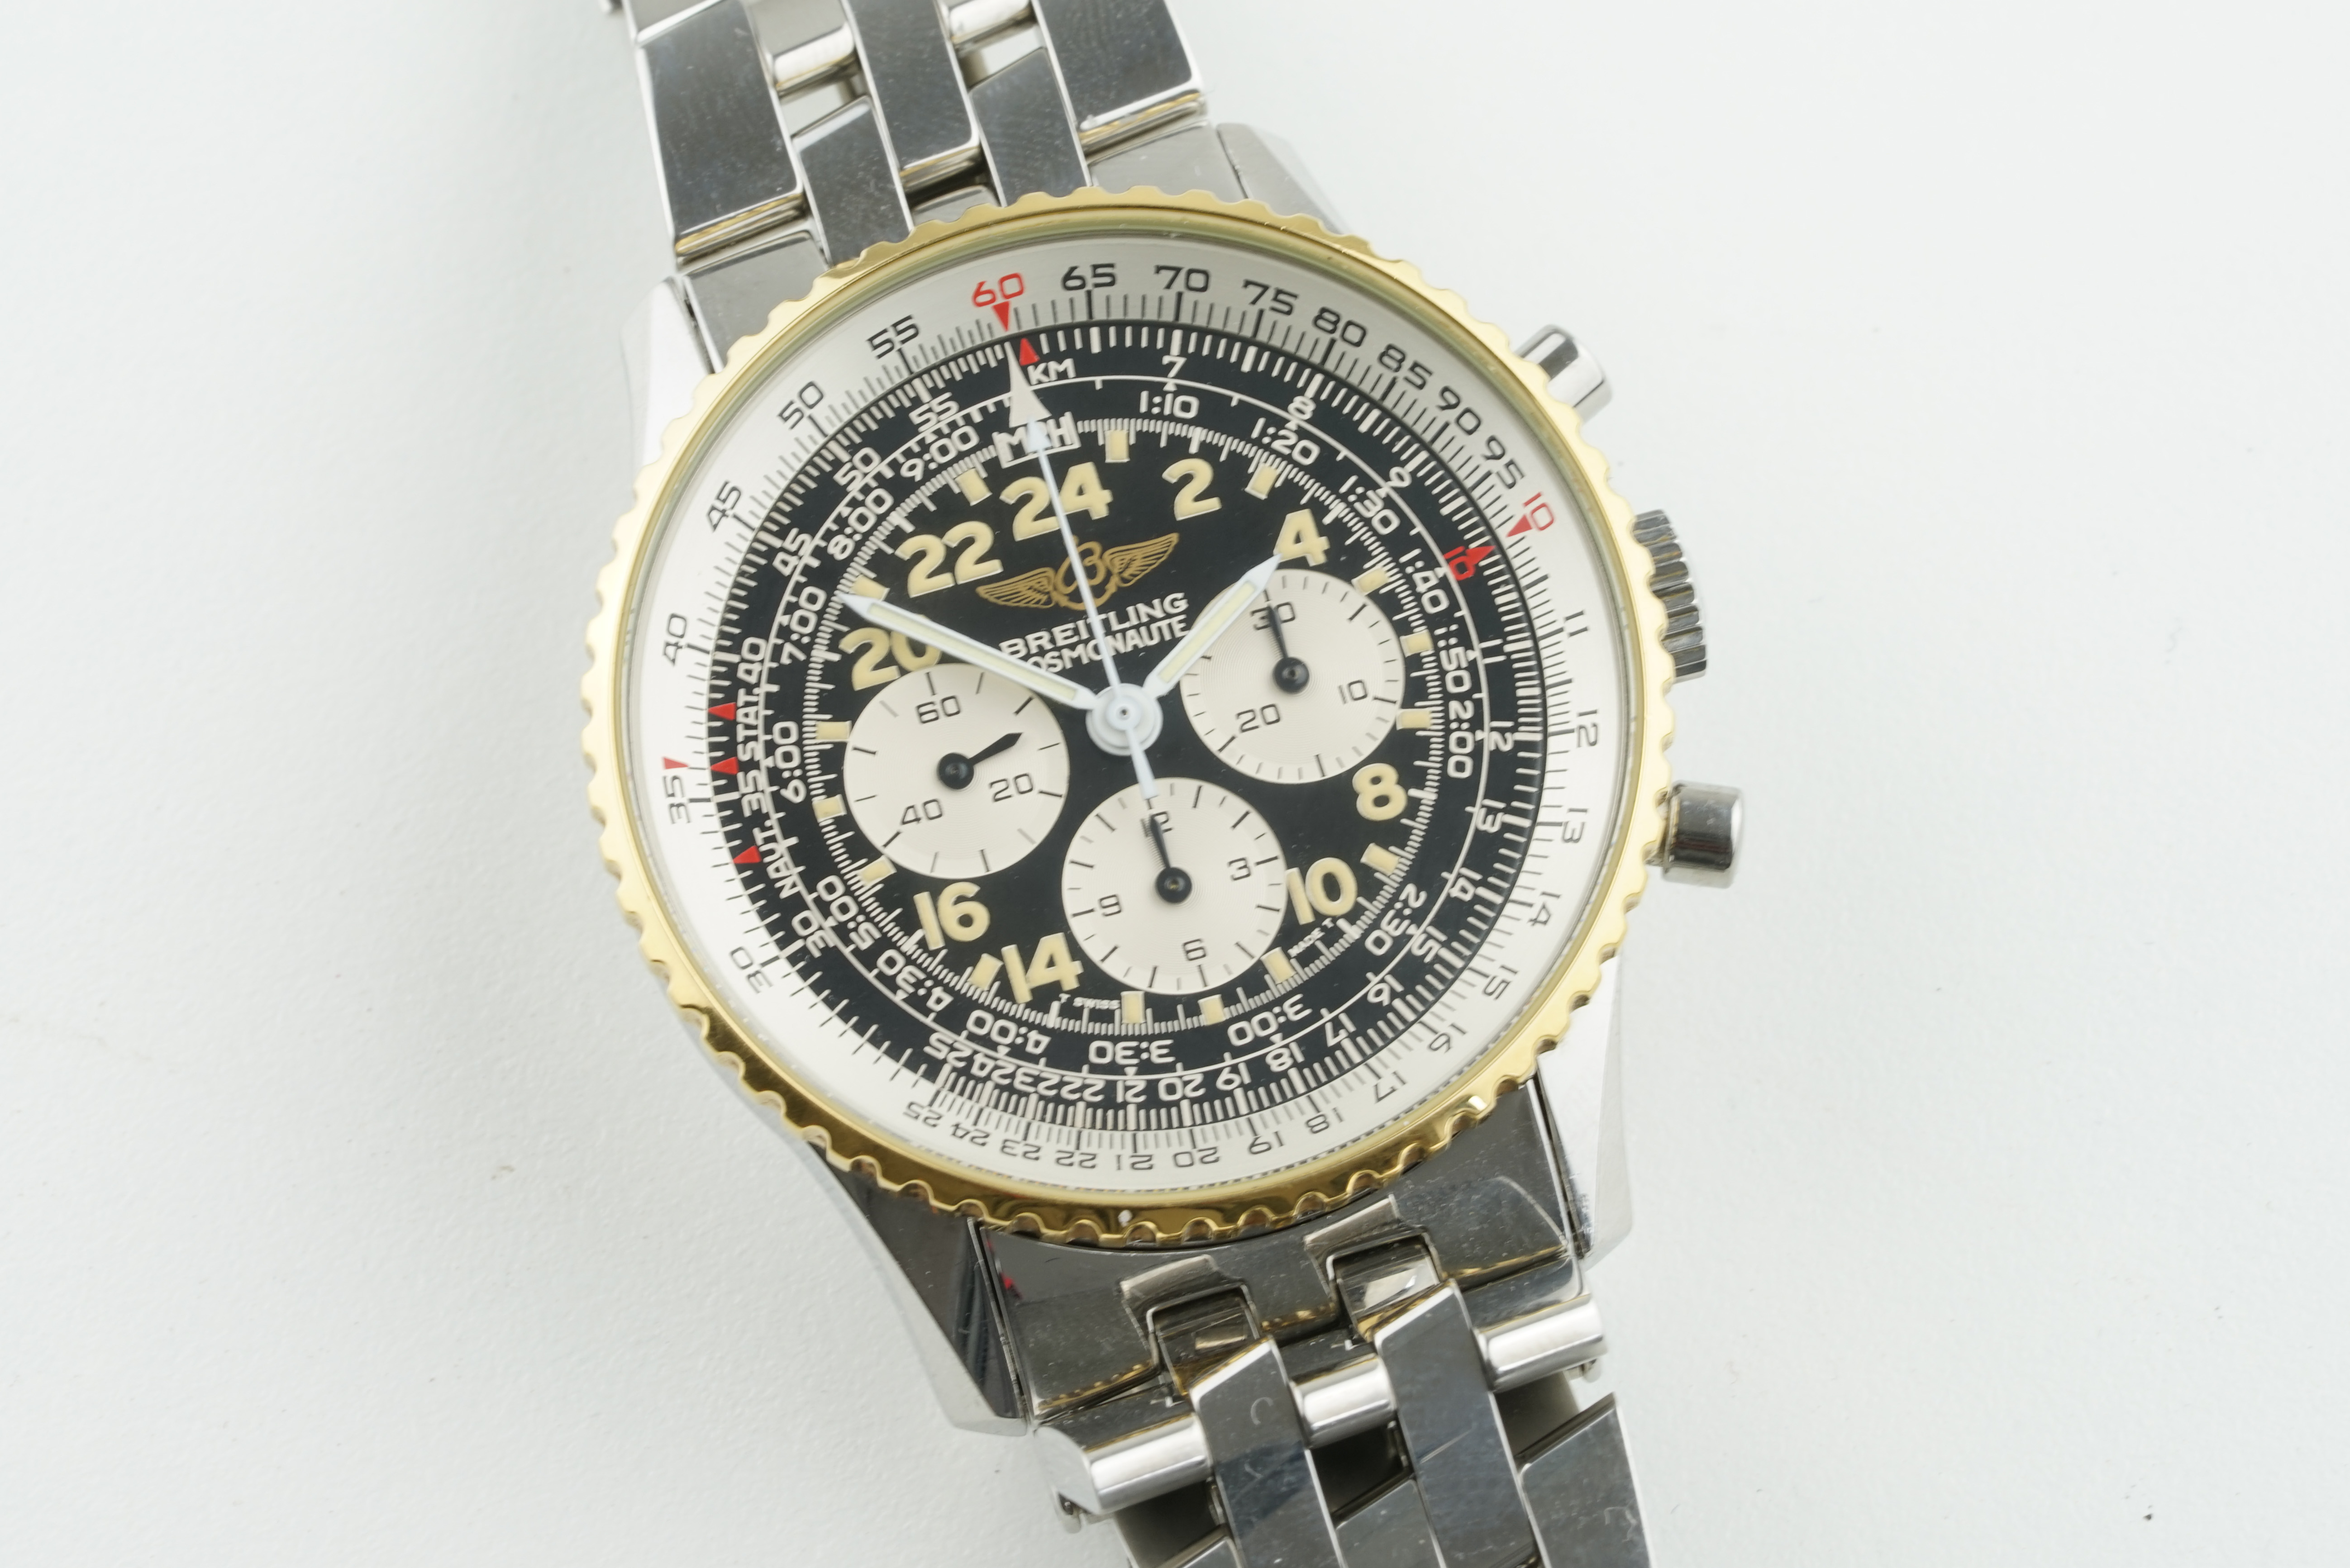 BREITLING NAVITIMER COSMONAUTE STEEL & GOLD CHRONOGRAPH W/ GUARANTEE PAPERS REF. 81600F CIRCA 1990S, - Image 2 of 3